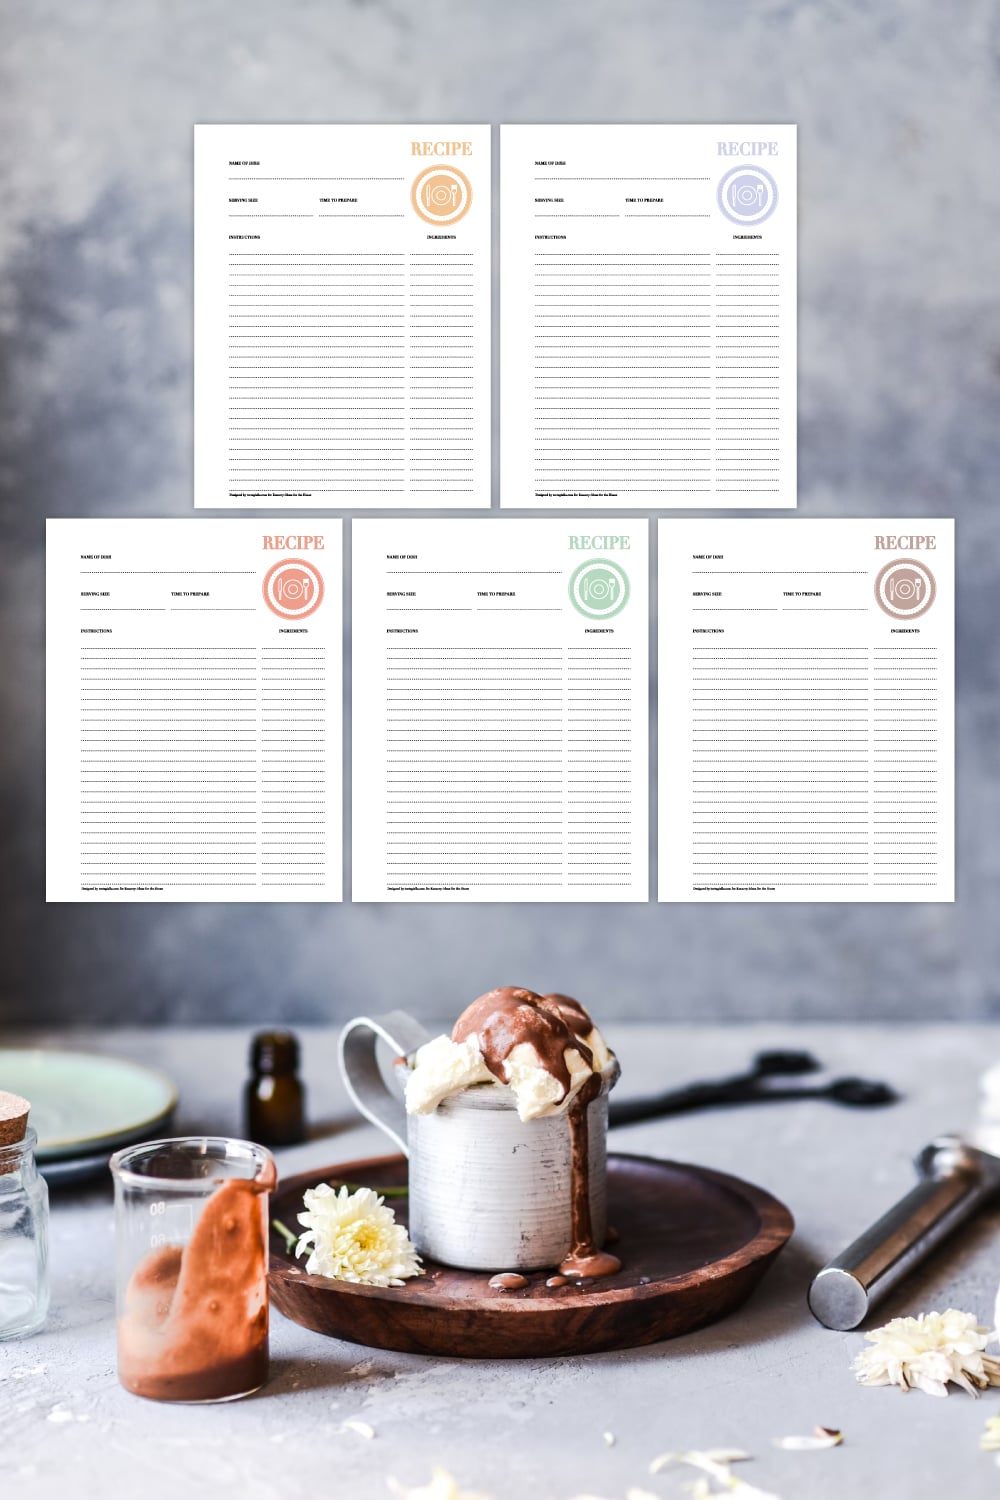 Preview of recipe template page in five colors above grey kitchen countertop image with dessert in mug and tools in view on the bottom.